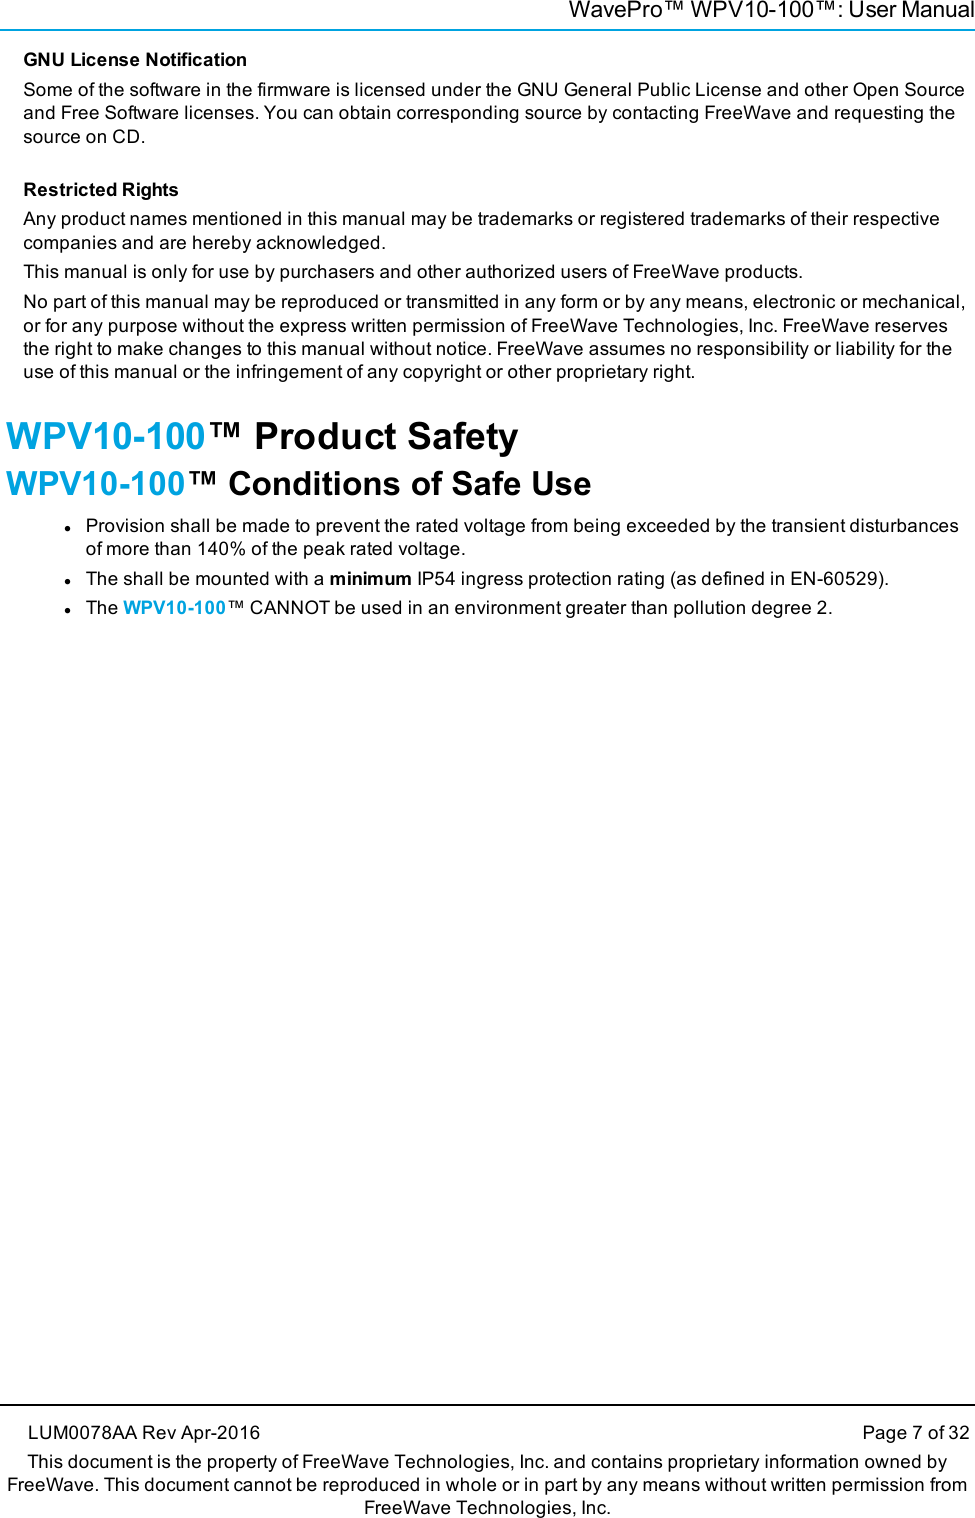 WavePro™ WPV10-100™: User ManualGNU License NotificationSome of the software in the firmware is licensed under the GNU General Public License and other Open Sourceand Free Software licenses. You can obtain corresponding source by contacting FreeWave and requesting thesource on CD.Restricted RightsAny product names mentioned in this manual may be trademarks or registered trademarks of their respectivecompanies and are hereby acknowledged.This manual is only for use by purchasers and other authorized users of FreeWave products.No part of this manual may be reproduced or transmitted in any form or by any means, electronic or mechanical,or for any purpose without the express written permission of FreeWave Technologies, Inc. FreeWave reservesthe right to make changes to this manual without notice. FreeWave assumes no responsibility or liability for theuse of this manual or the infringement of any copyright or other proprietary right.WPV10-100™ Product SafetyWPV10-100™ Conditions of Safe UselProvision shall be made to prevent the rated voltage from being exceeded by the transient disturbancesof more than 140% of the peak rated voltage.lThe shall be mounted with a minimum IP54 ingress protection rating (as defined in EN-60529).lThe WPV10-100™ CANNOT be used in an environment greater than pollution degree 2.LUM0078AA Rev Apr-2016 Page 7 of 32This document is the property of FreeWave Technologies, Inc. and contains proprietary information owned byFreeWave. This document cannot be reproduced in whole or in part by any means without written permission fromFreeWave Technologies, Inc.